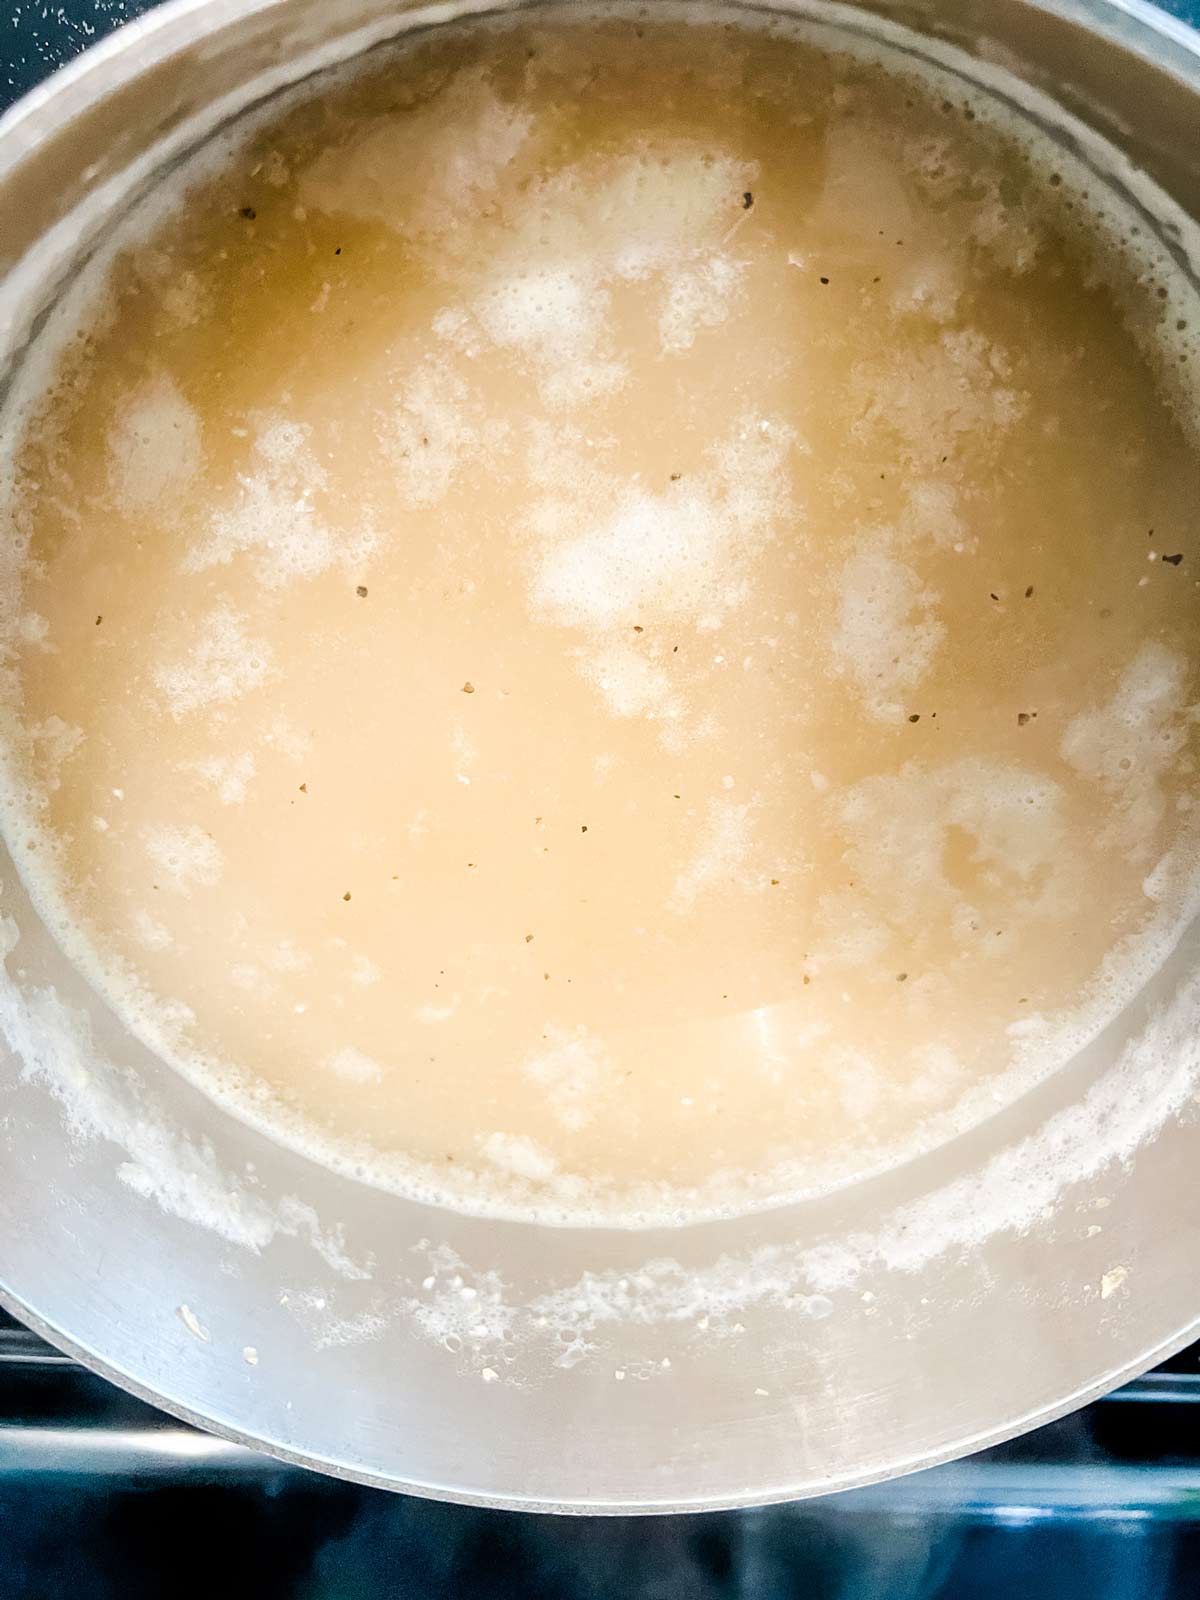 Grits cooking in water.